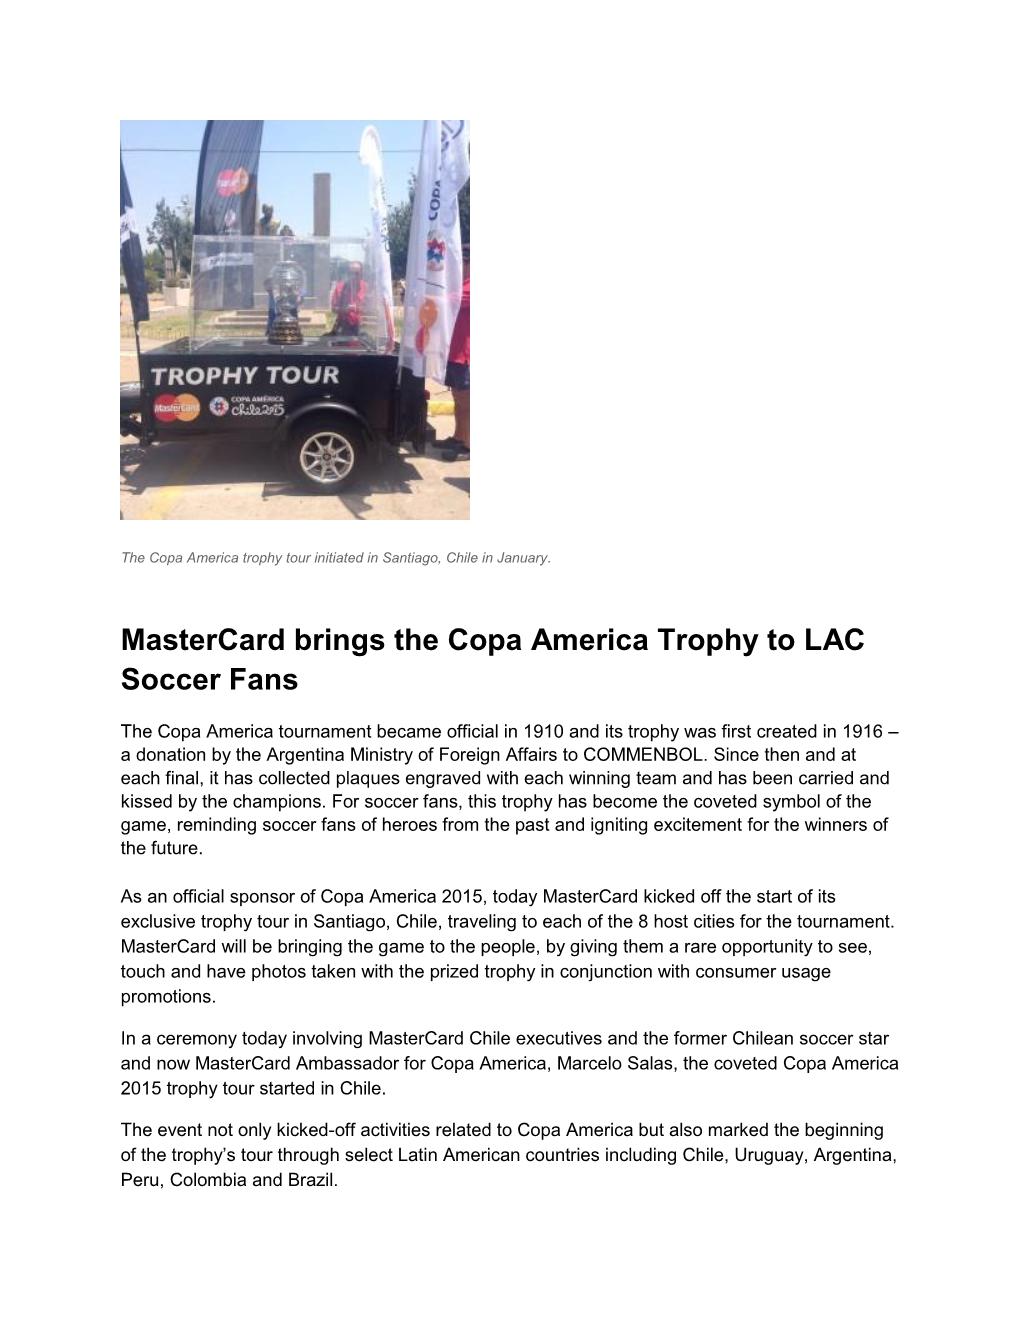 Mastercard Brings the Copa America Trophy to LAC Soccer Fans